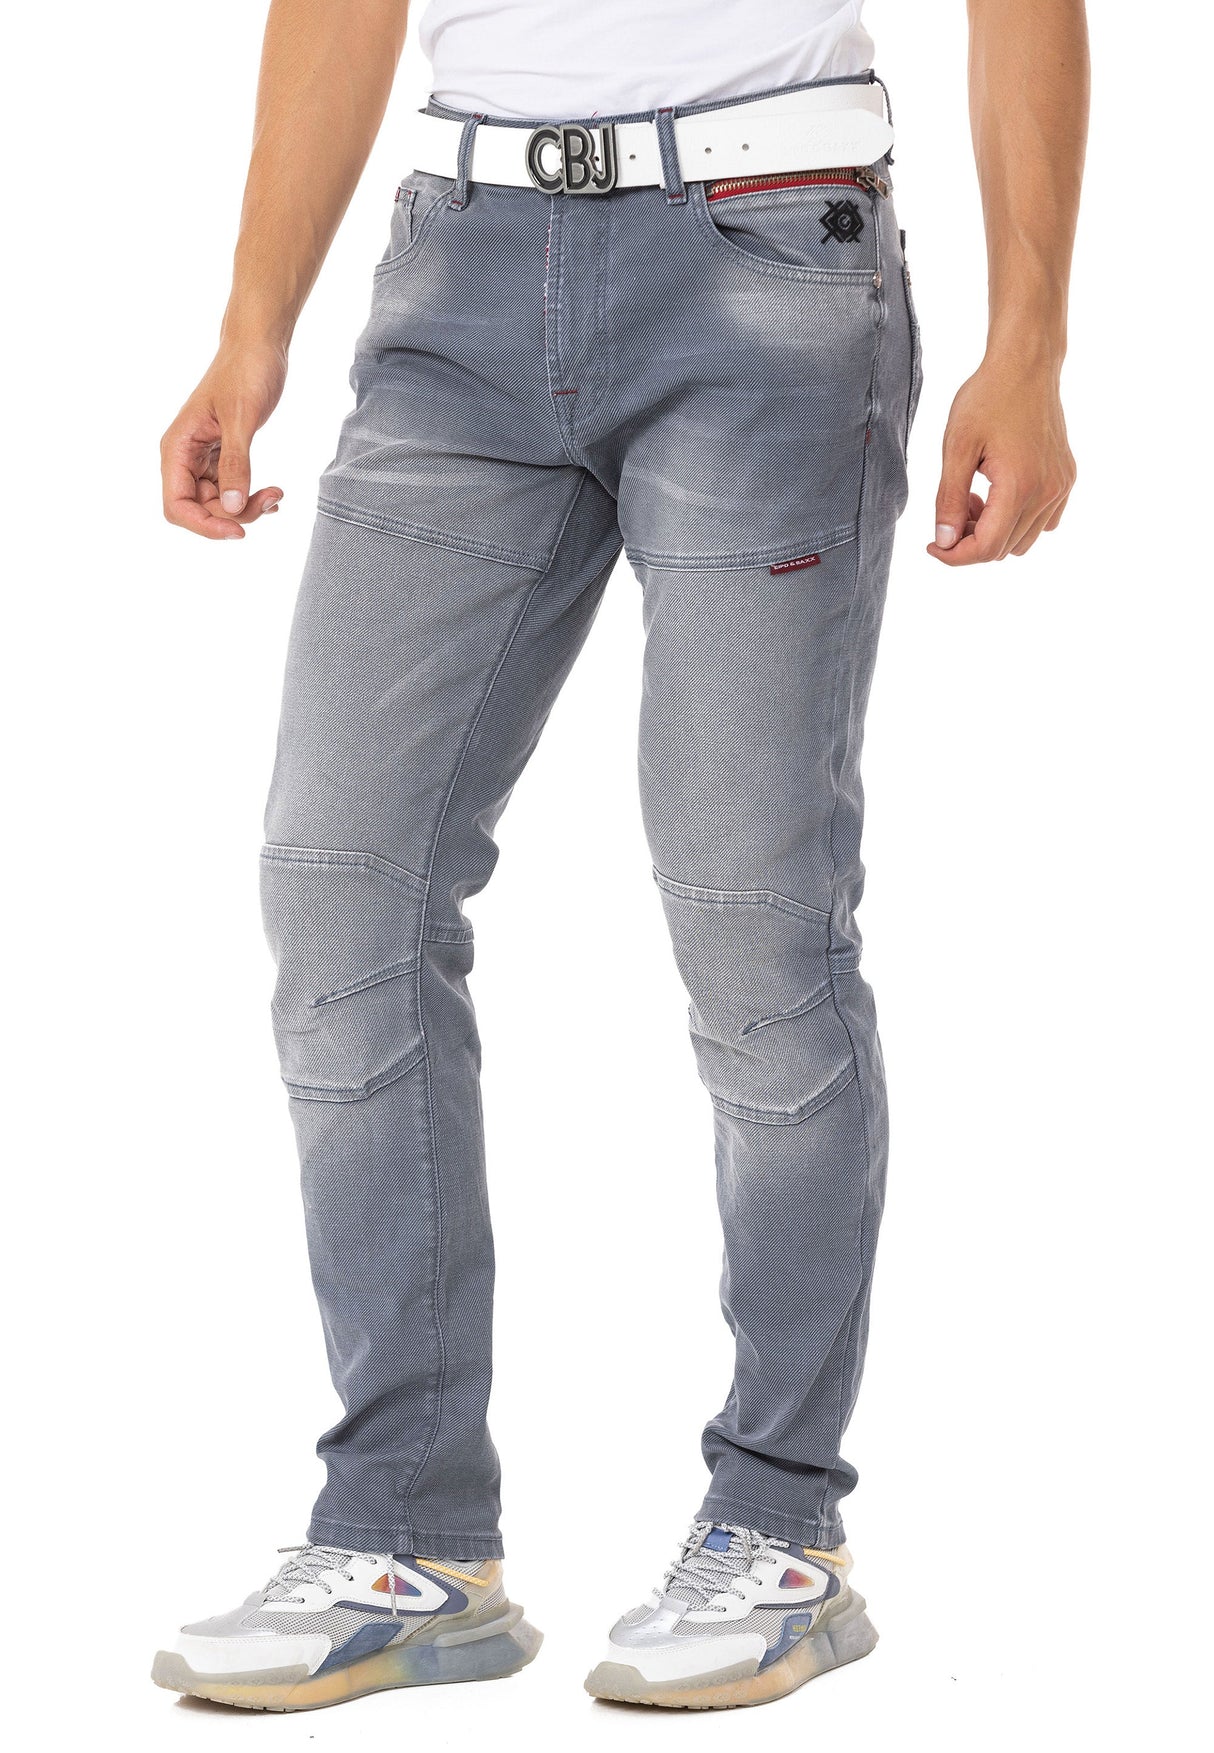 CD699 men's straight fit jeans with a cool used wash